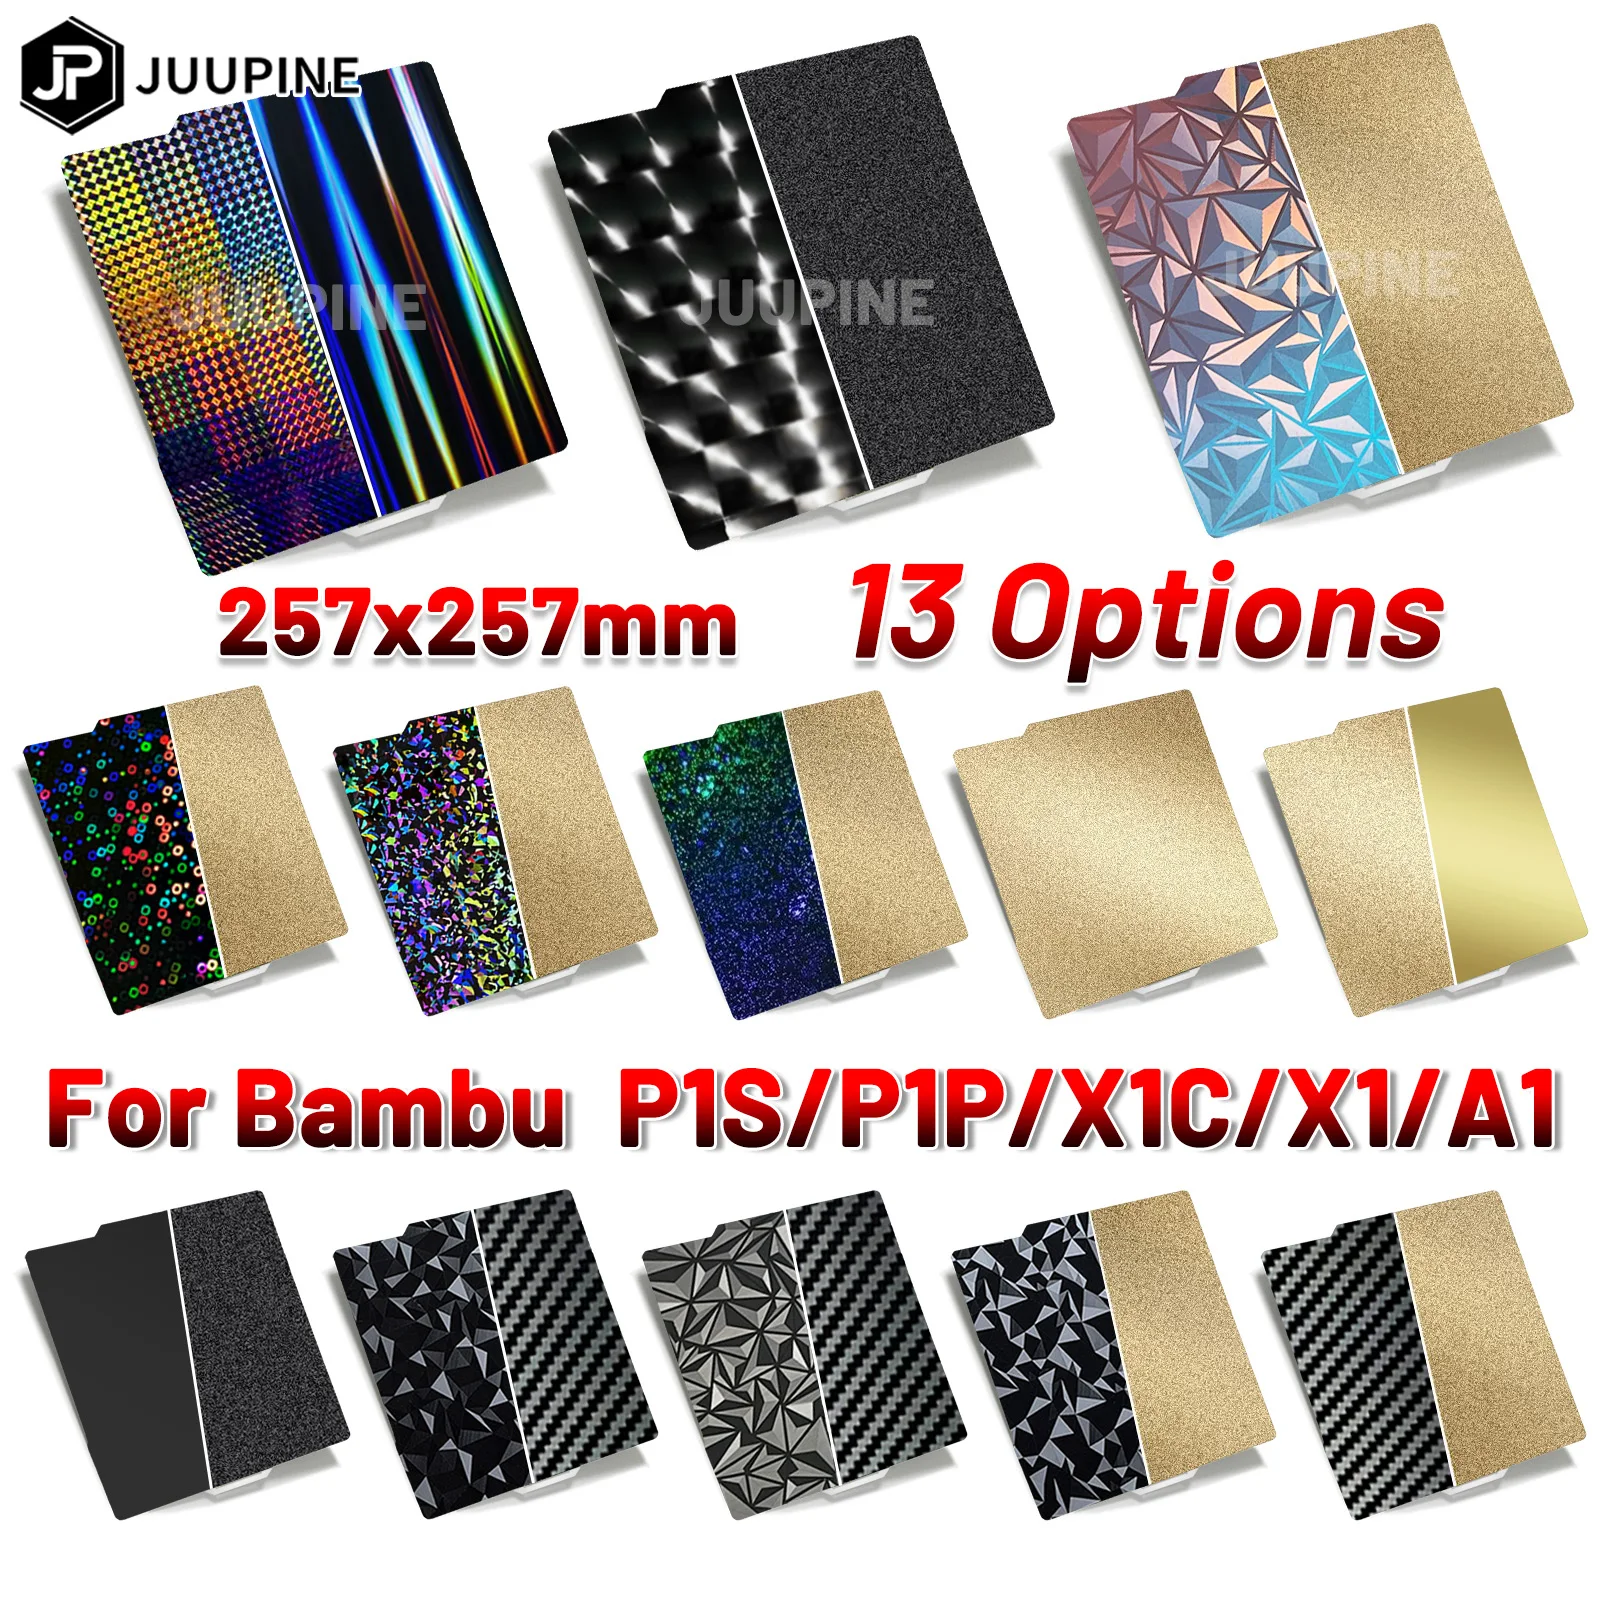 Juupine For Bambulab Build Plate P1s Spring Steel Sheet Pei Sheet 257x257 Build Plate P1s Bamboo Lab Bambulabs X1 Carbon X1 A1